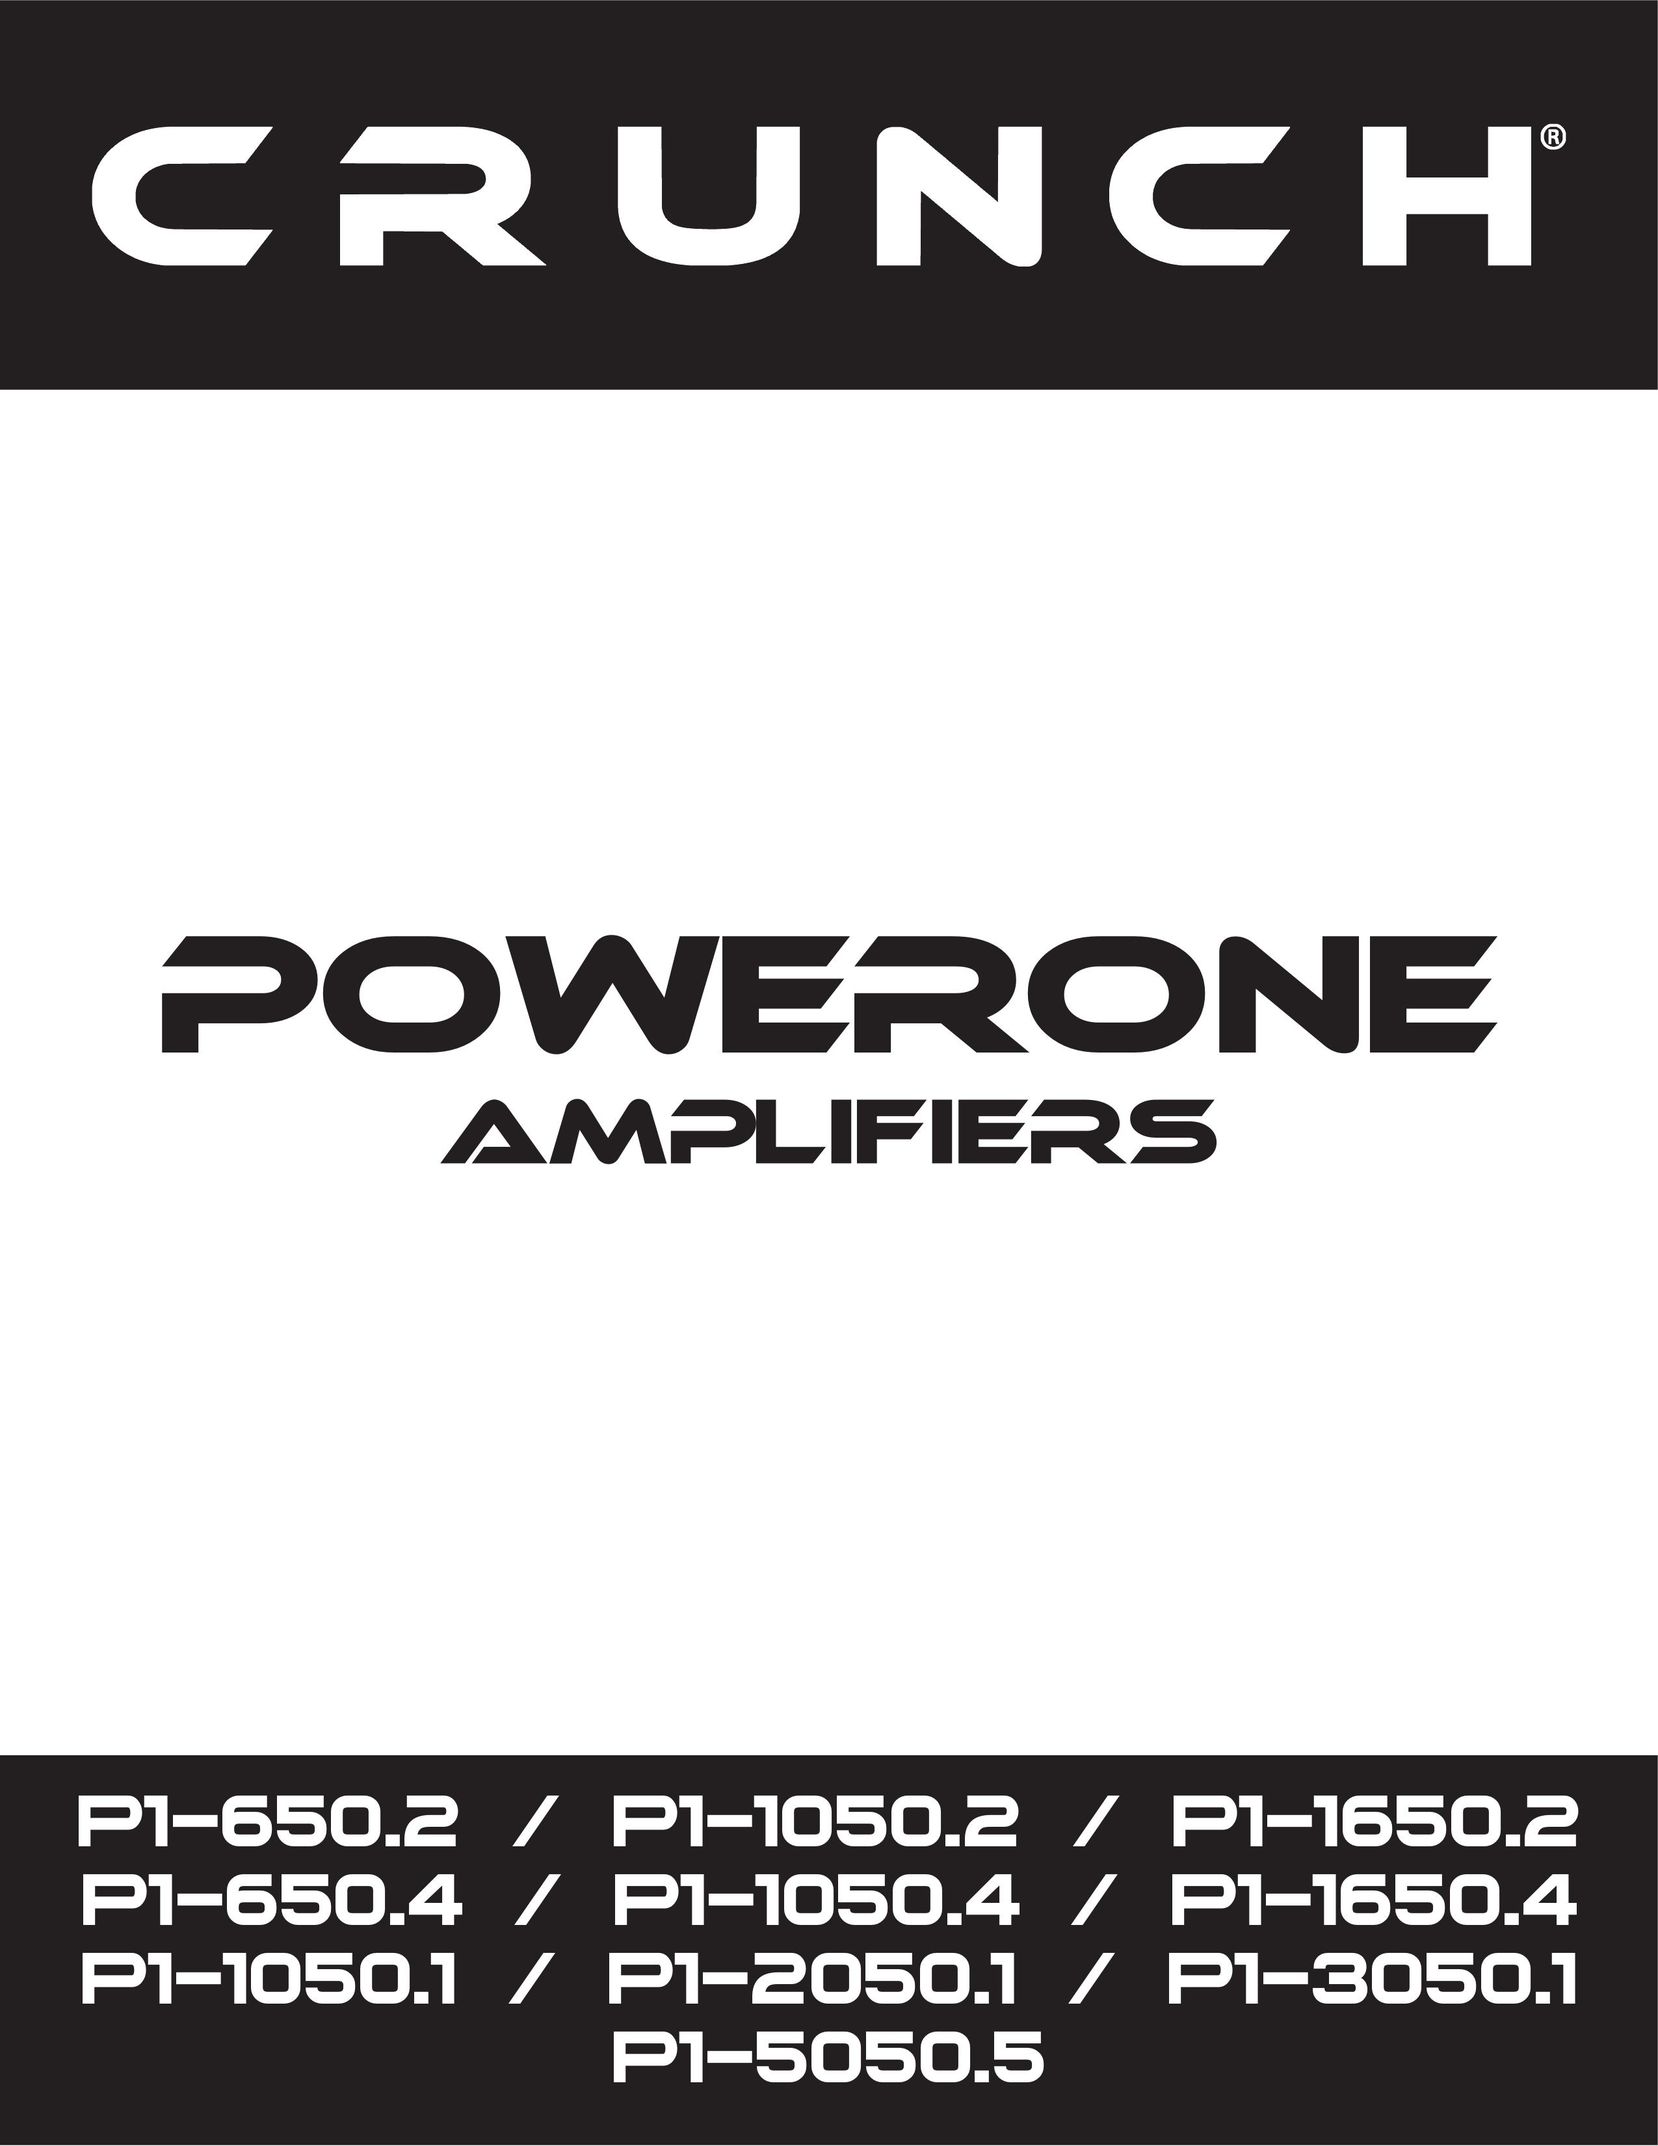 Crunch P1-650.2 Stereo Amplifier User Manual